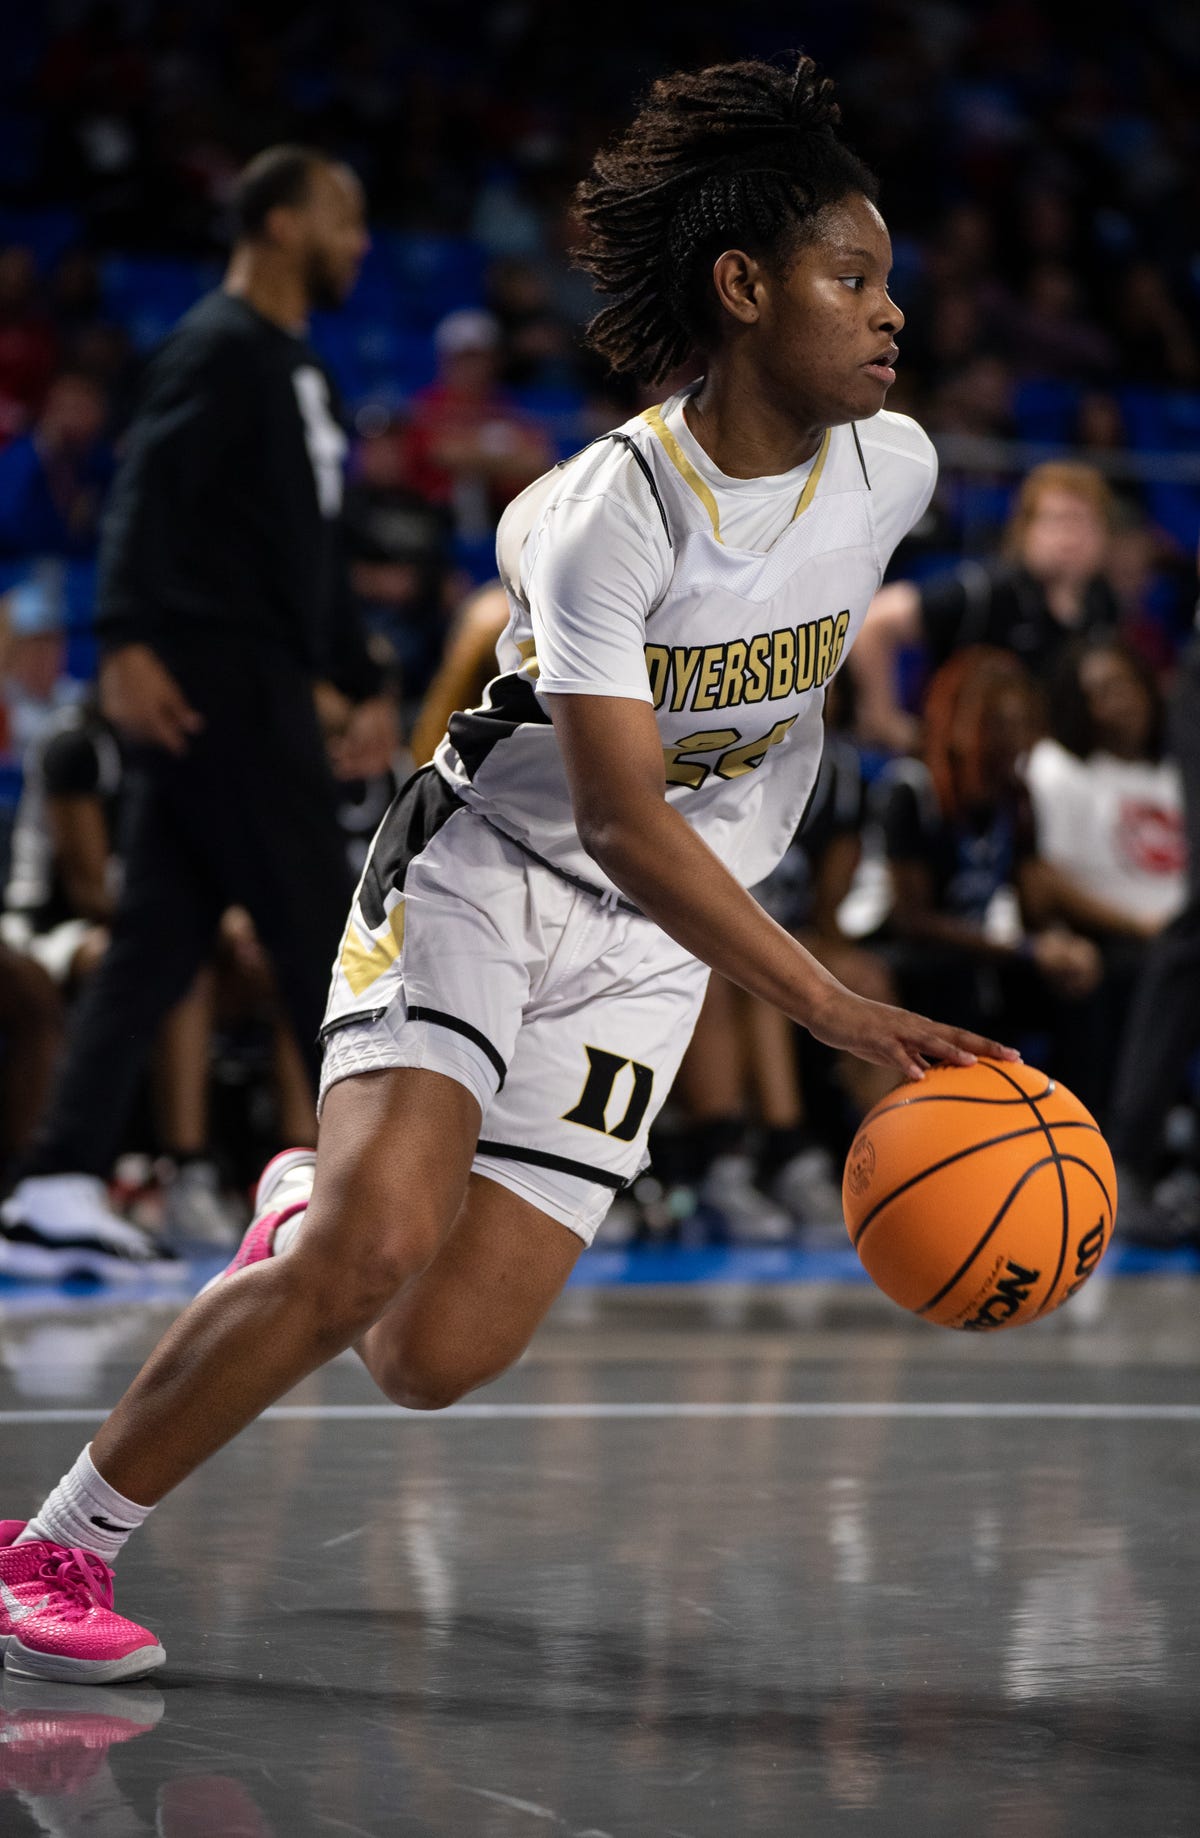 Dyersburg’s Joya Crawford Leads Team to First TSSAA State Tournament Win Since 2005 with Netala Dixon’s 9 Points Contribution